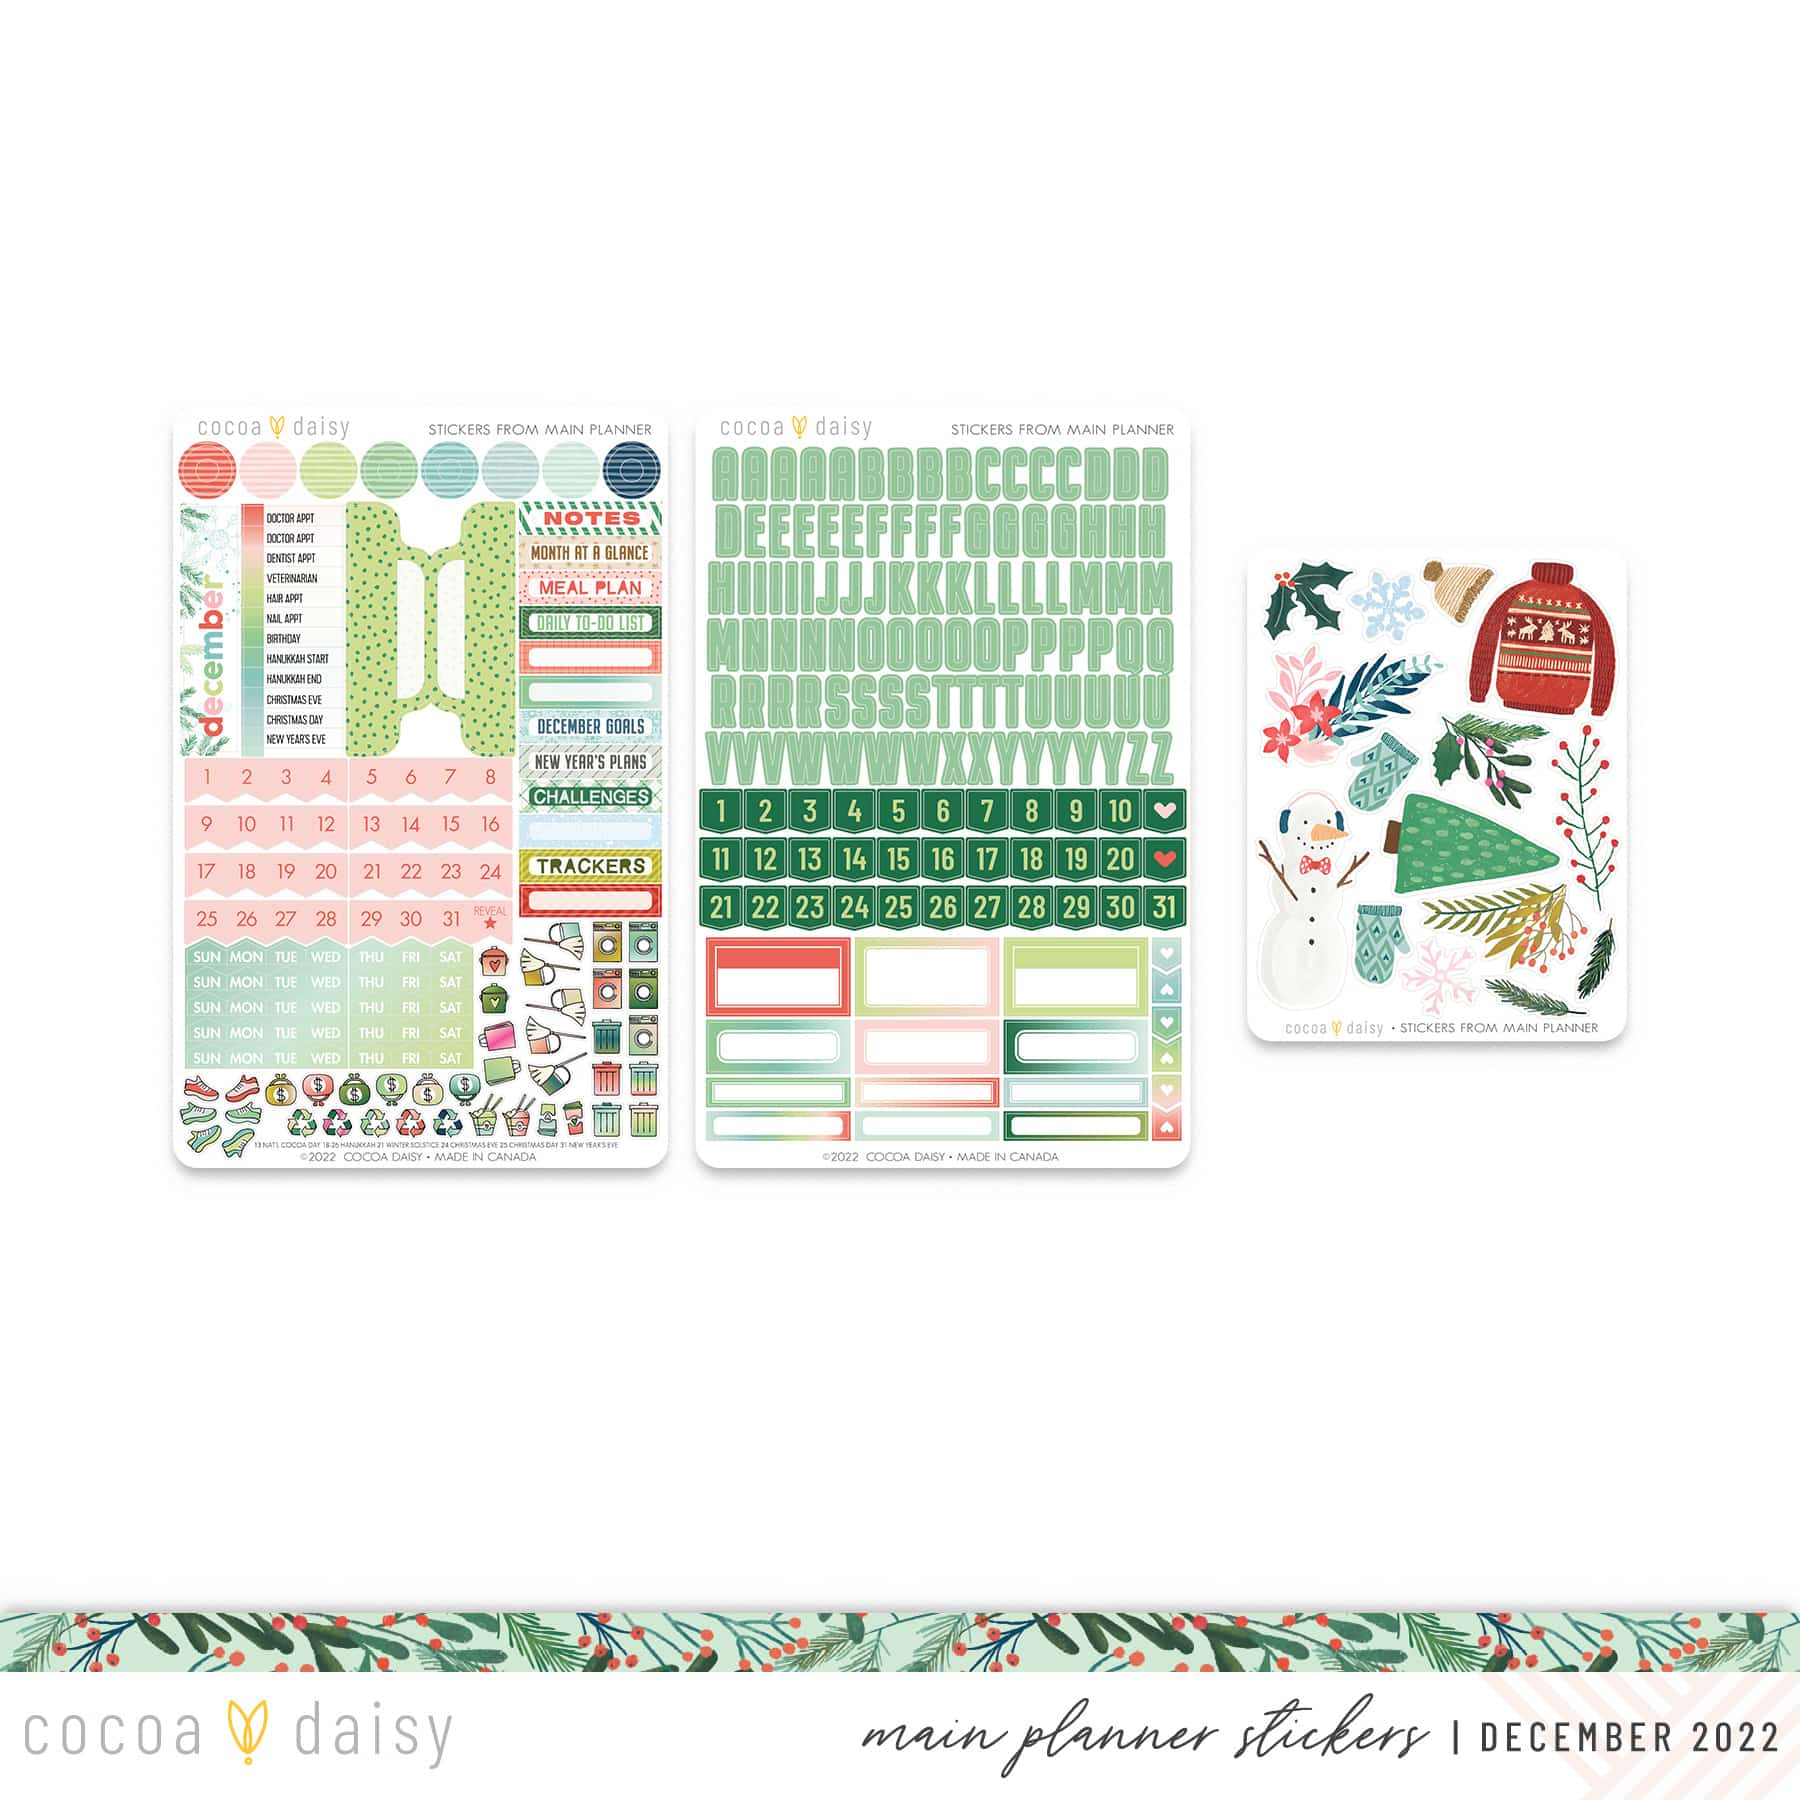 Frost & Frolic Stickers from Main Planner December 2022